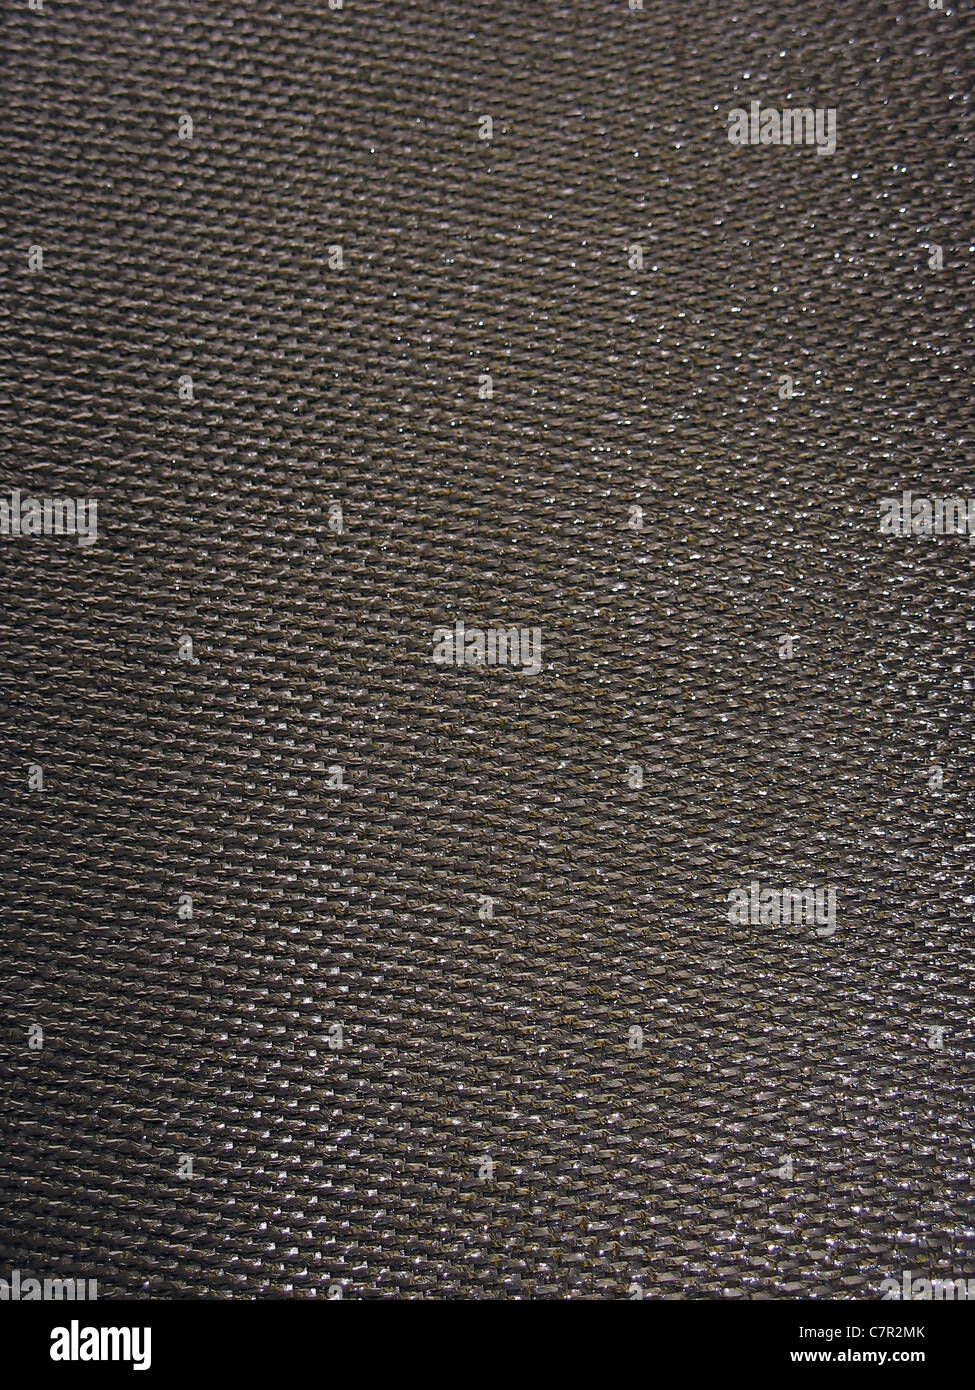 Real carbon fiber in its raw form - this is the material that is used to make durable and light weight parts. Stock Photo